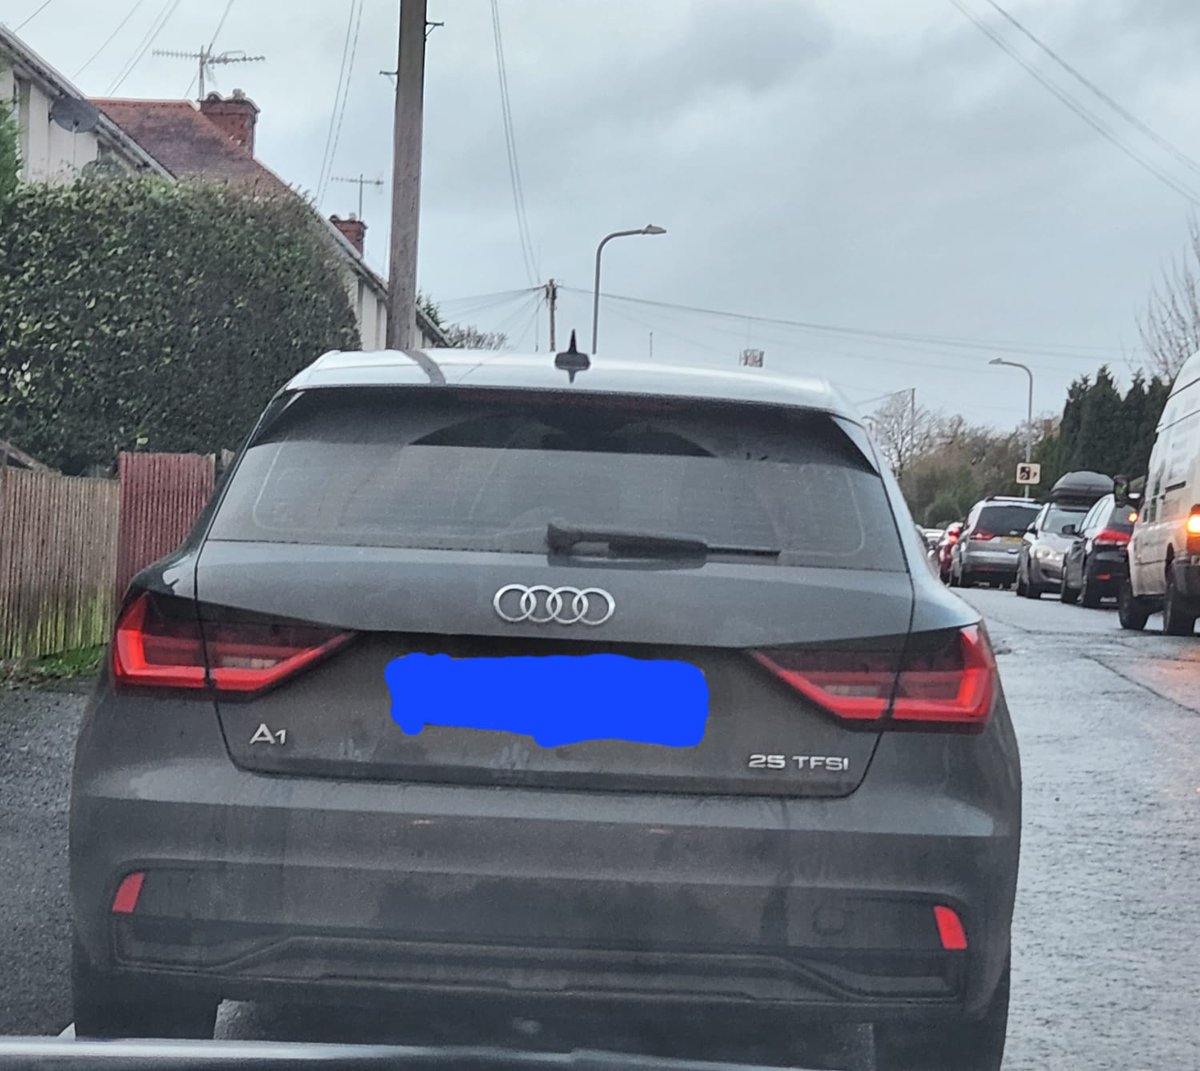 You are required to have a valid driving licence and insurance to drive a motor vehicle on the roads. Failure to do so results in you being reported for the offences and your vehicle being seized. #policingpromise #saferroads